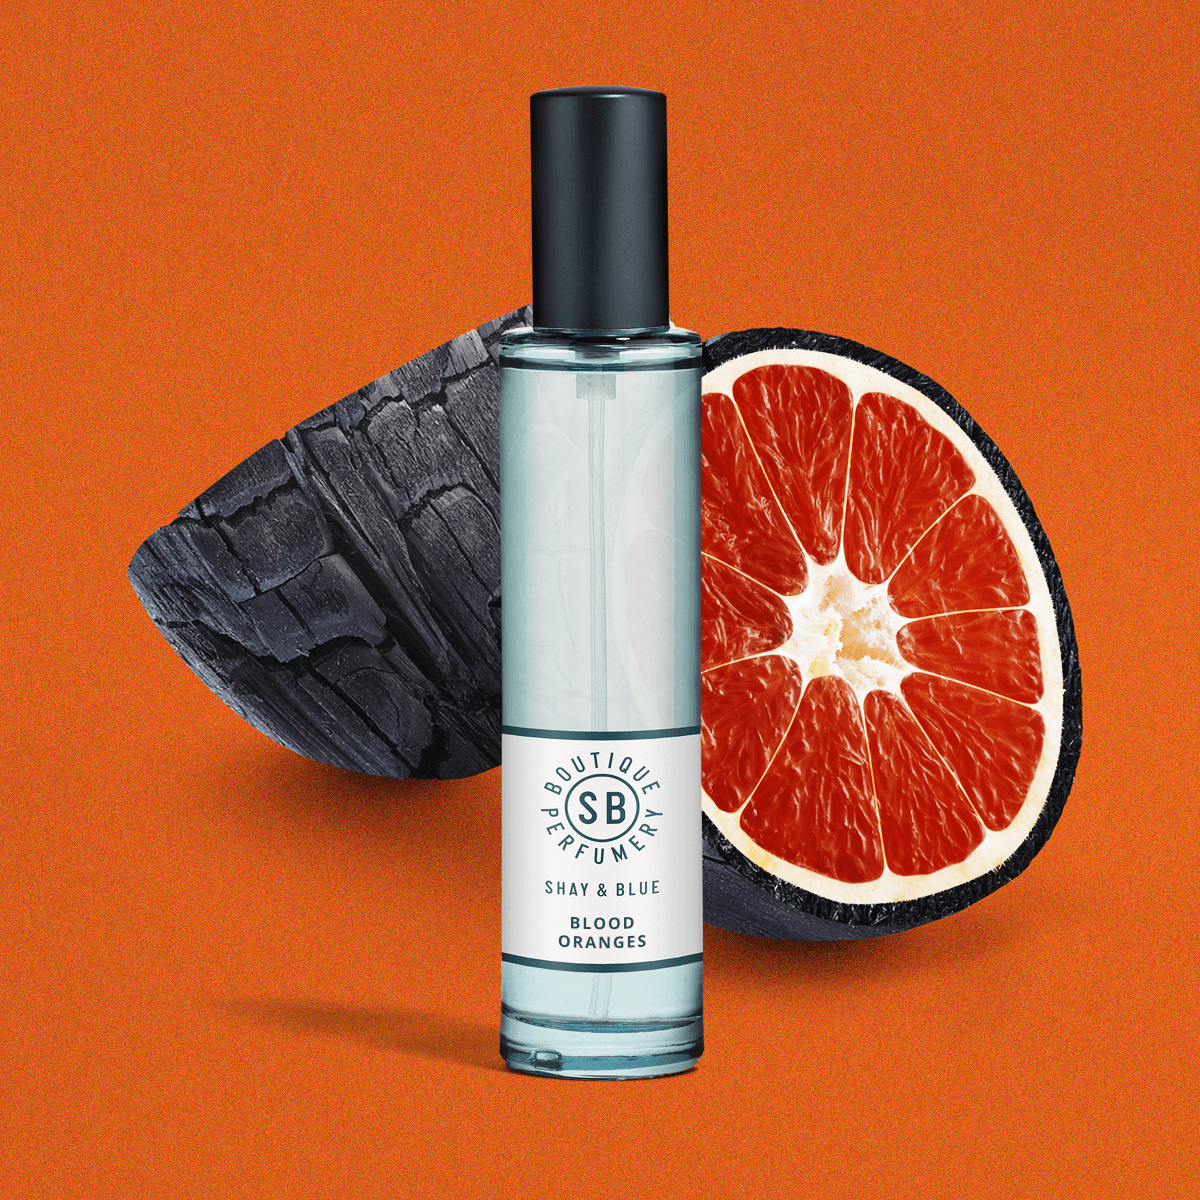 Blood Oranges Fragancia 30ml | Zesty blood oranges with rich and sensual blend of woods and smoky leather. | Fragancia limpia para todos los sexos | Shay & Blue